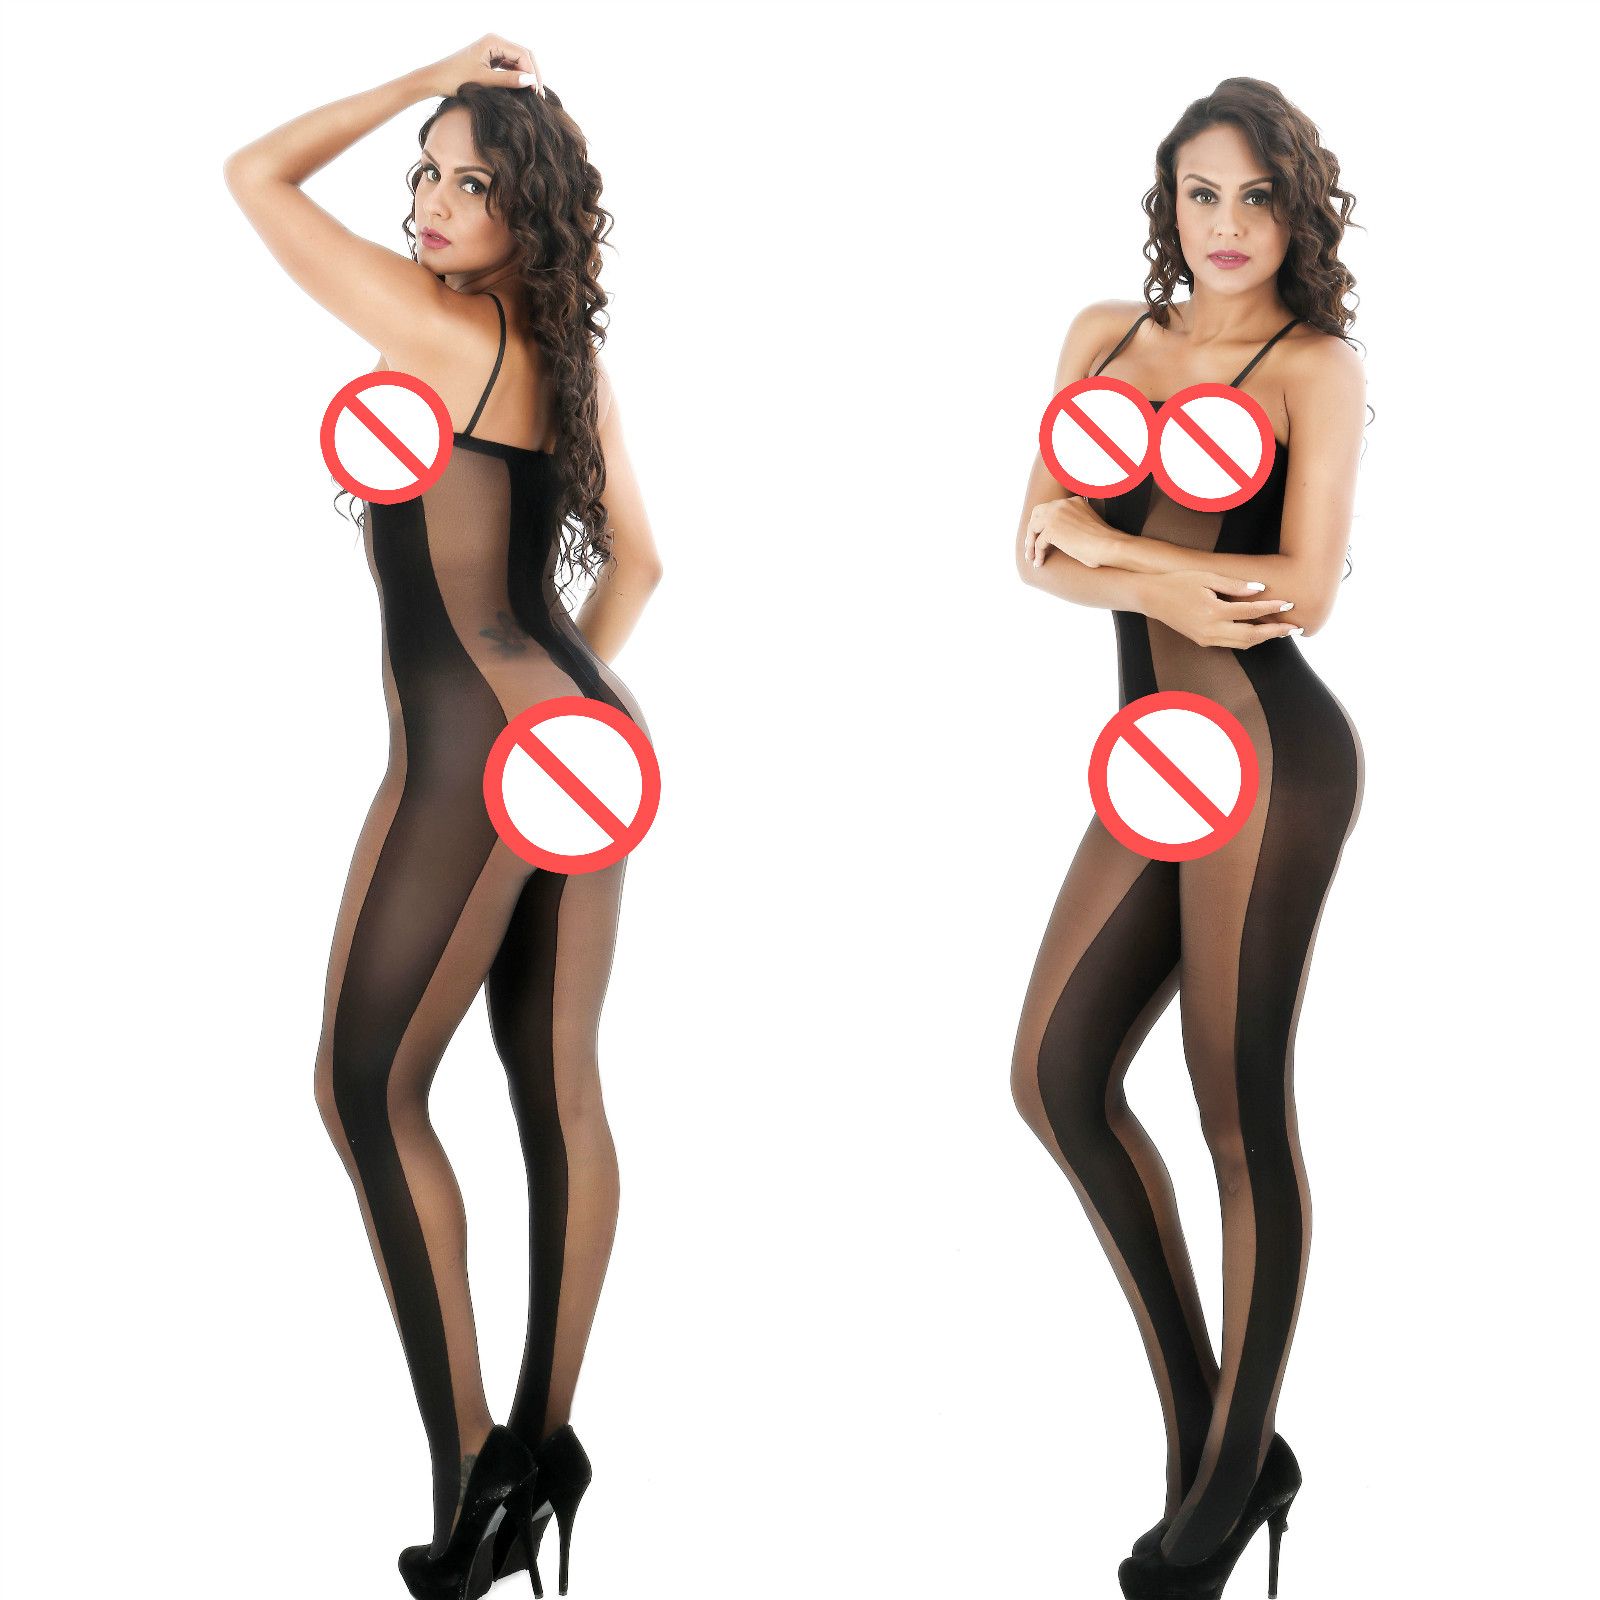 2019 See Through Black Open Crotch Hooded Socks Full Bodysuit Sexy  Bodystocking For Women Stretchy Sexy Lingerie Hot Teddies From Abbyelade,  $6.6 | ...